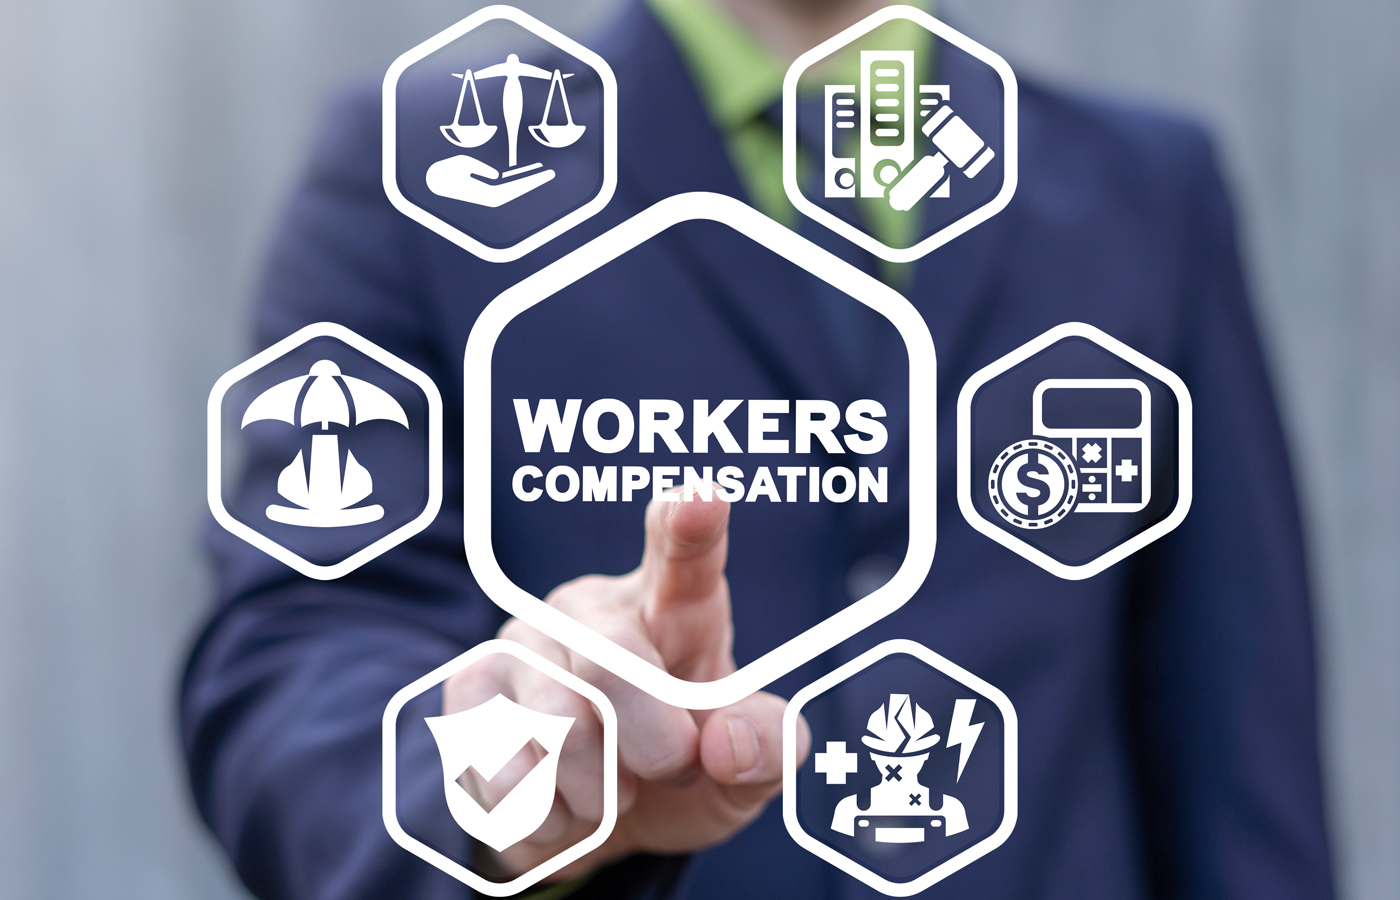 tr_20240110-how-to-reduce-workers-compensation-costs.jpg